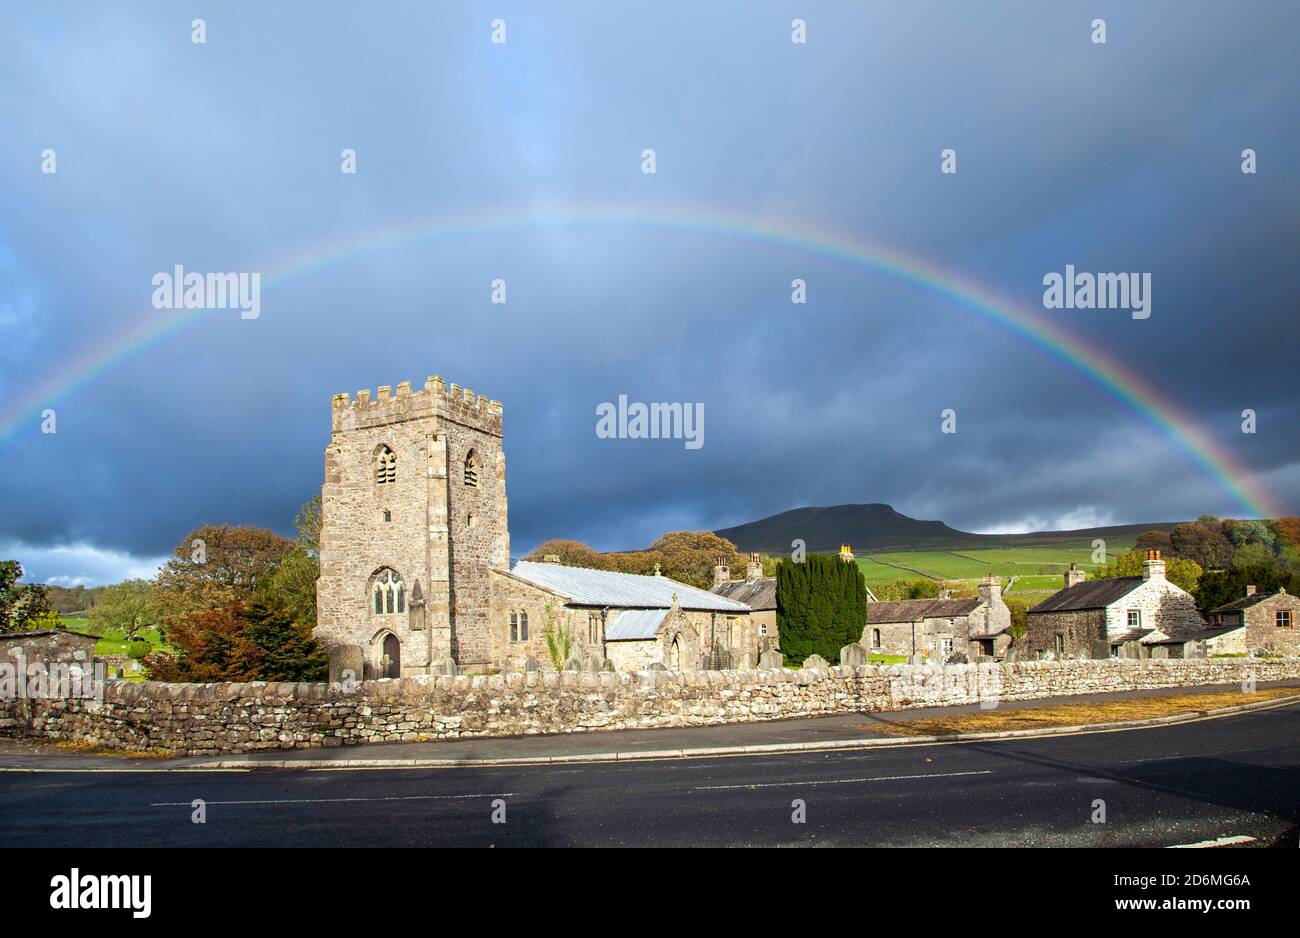 Rainbow over the village church of St Oswalds in the Yorkshire village of Horton in Ribblesdale with the mountain of Pen-y-ghent  on the Pennine Way Stock Photo